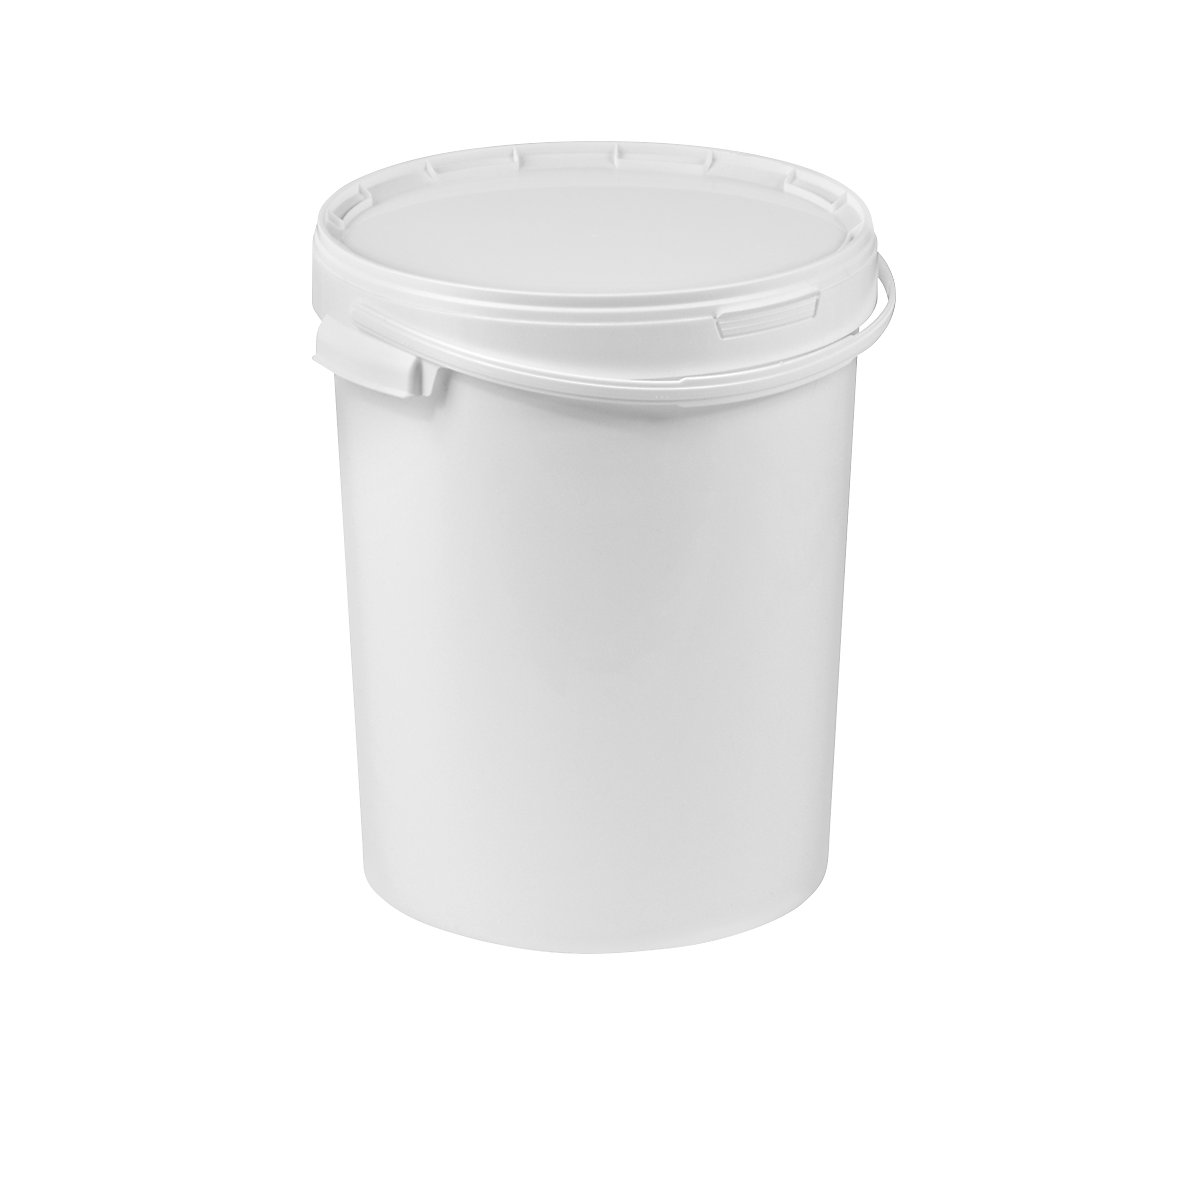 Bucket with lid – eurokraft basic, suitable for foodstuffs, 10+ items, capacity 25 l-7